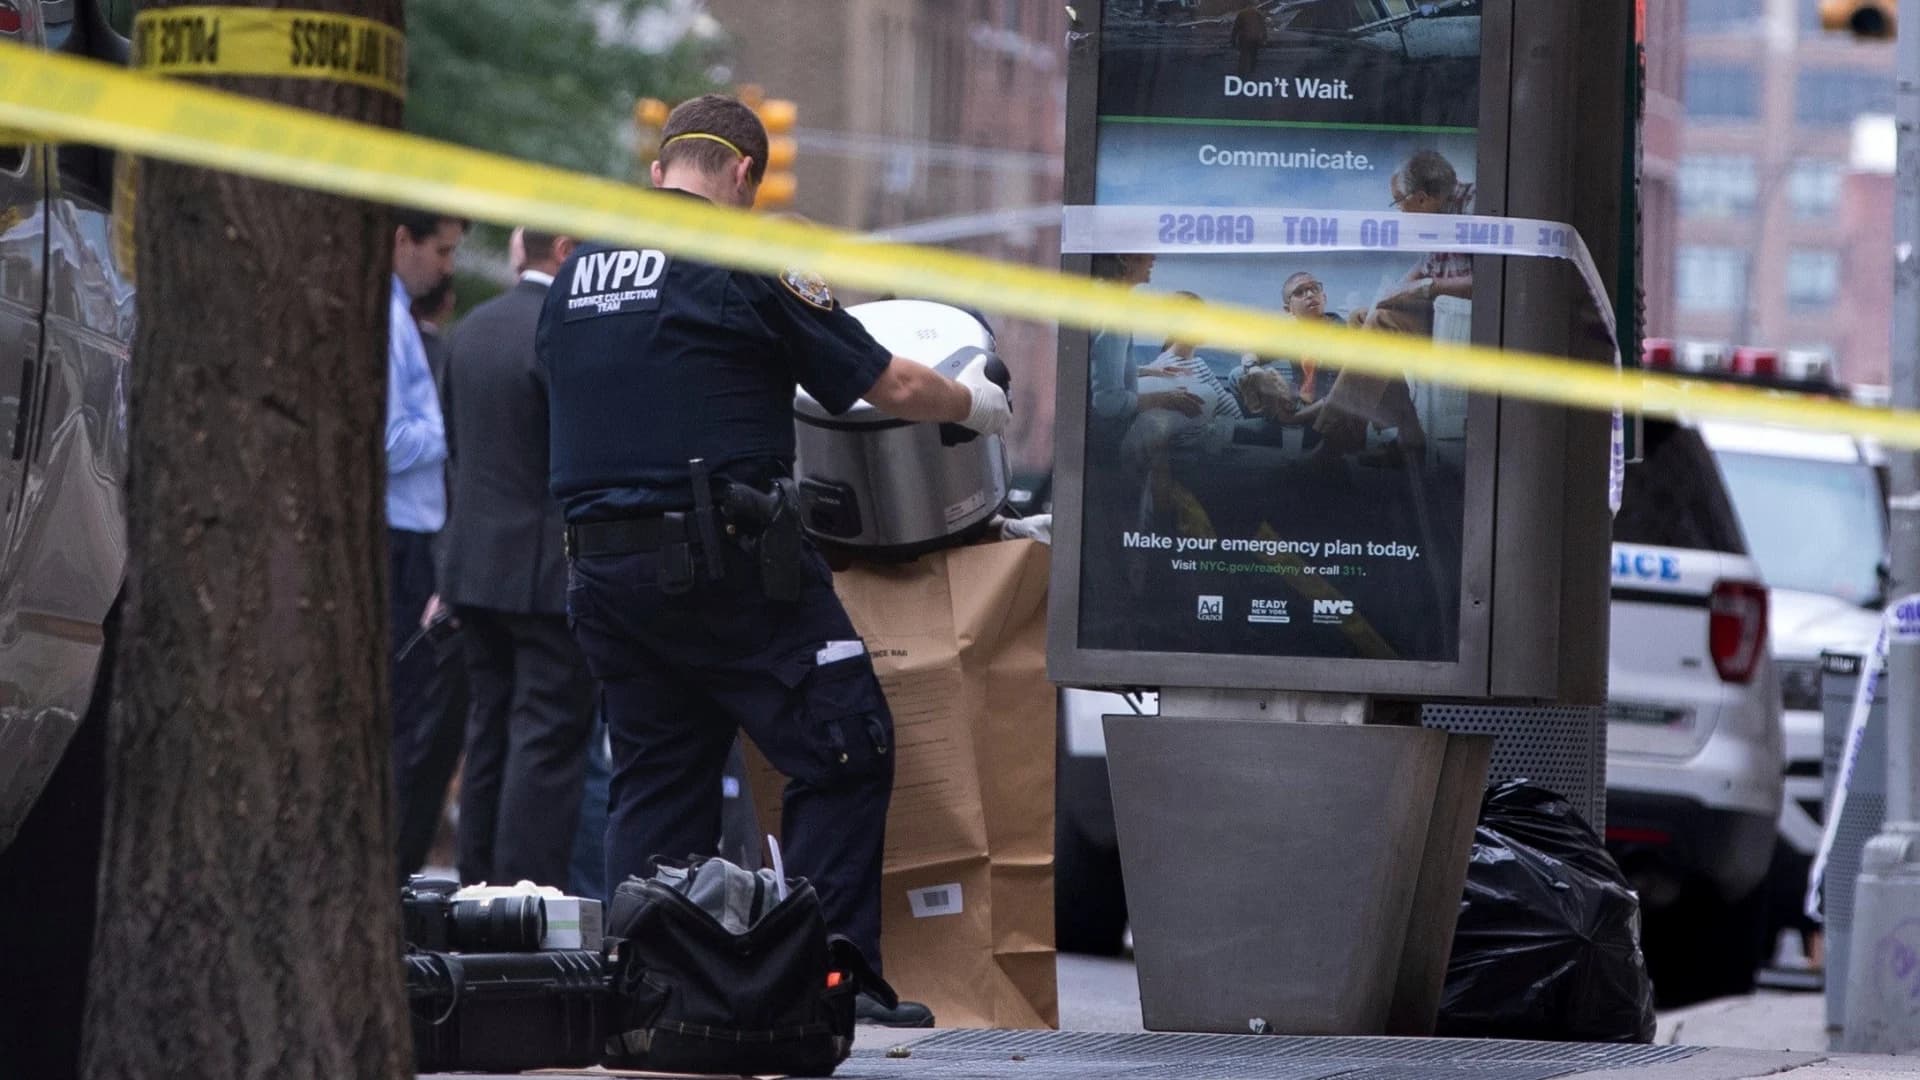 Police charge suspect with planting false bomb in NYC subway scare